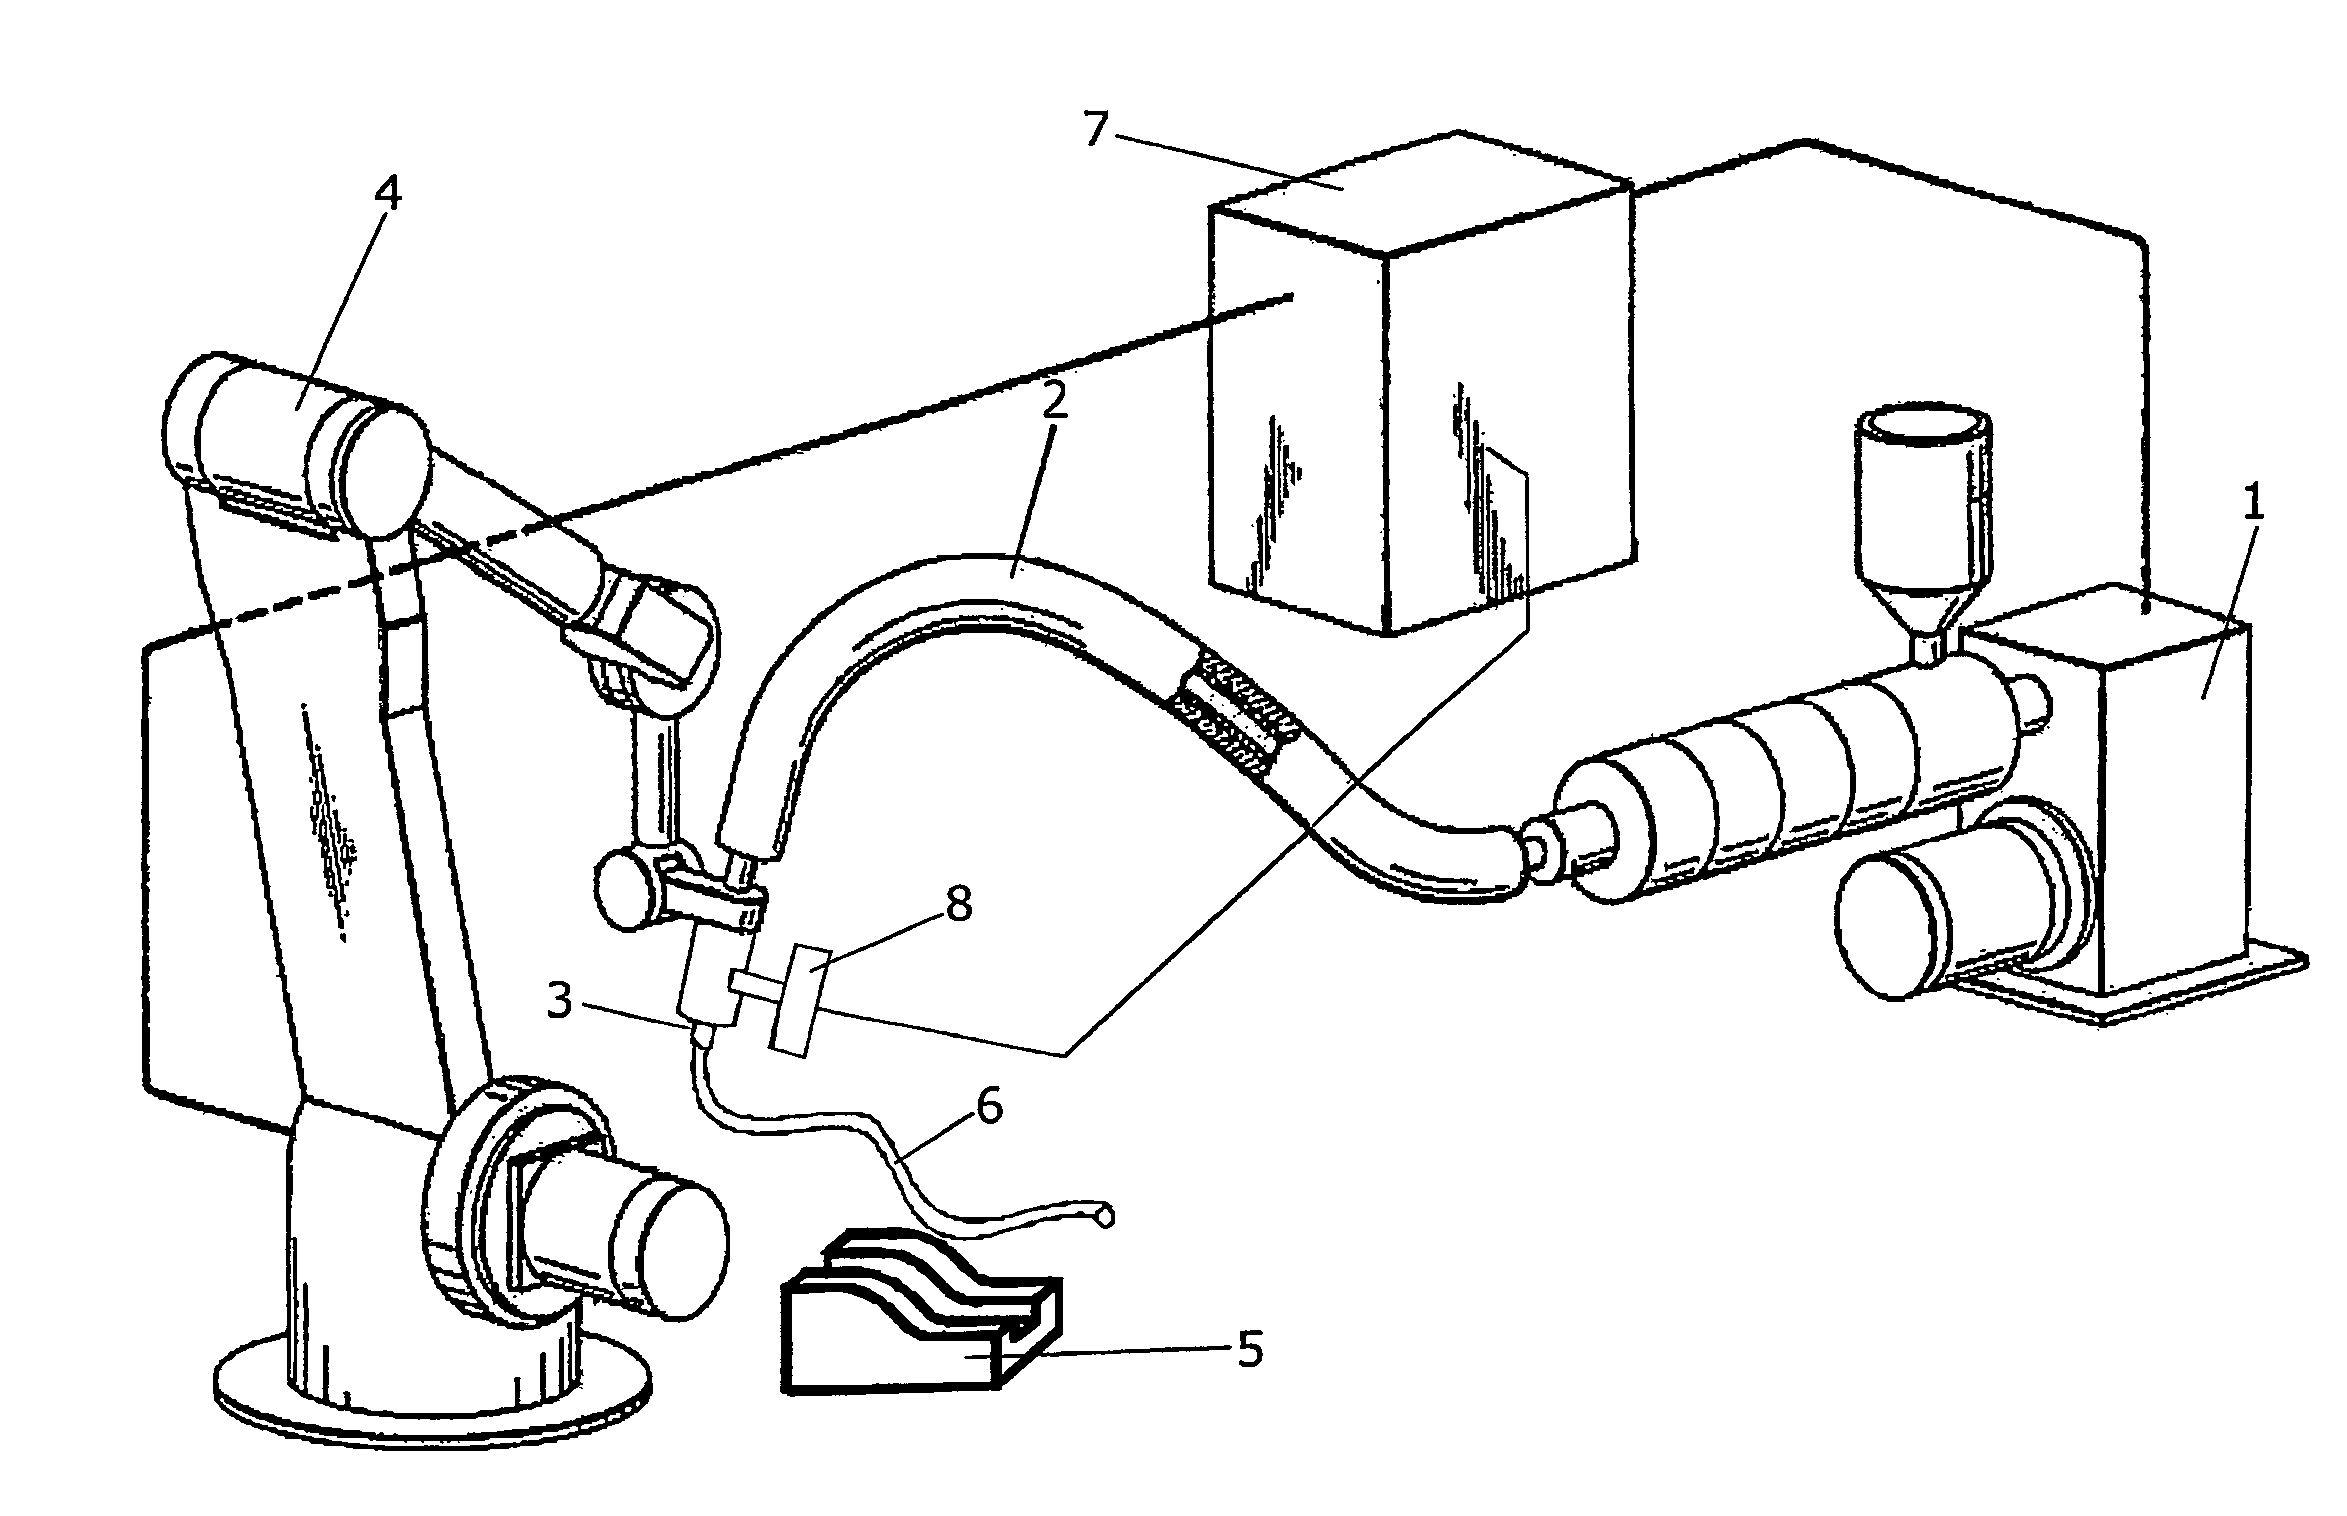 Manufacturing of shaped coolant hoses